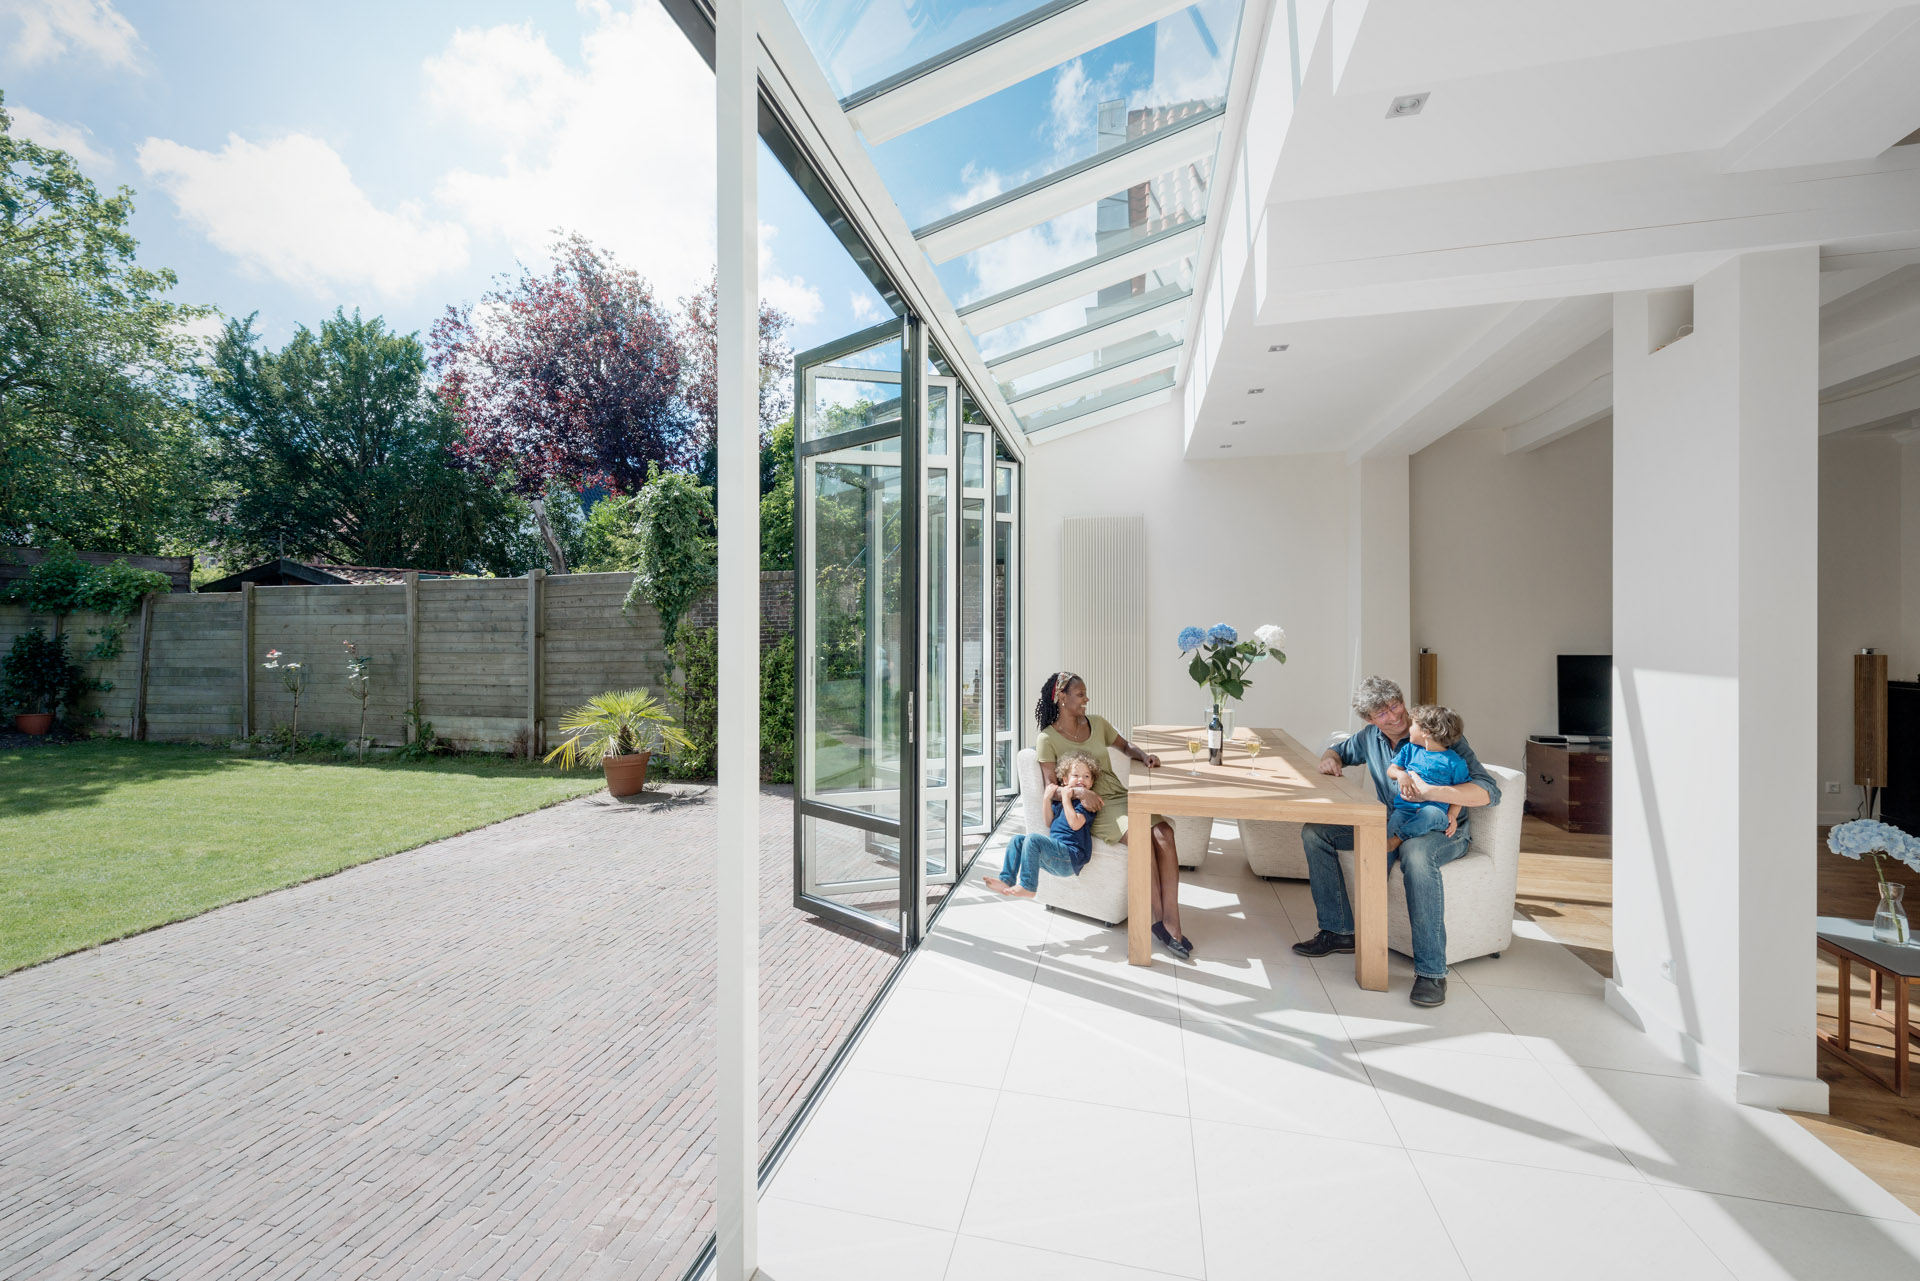 Things to consider when buying a wintergarden